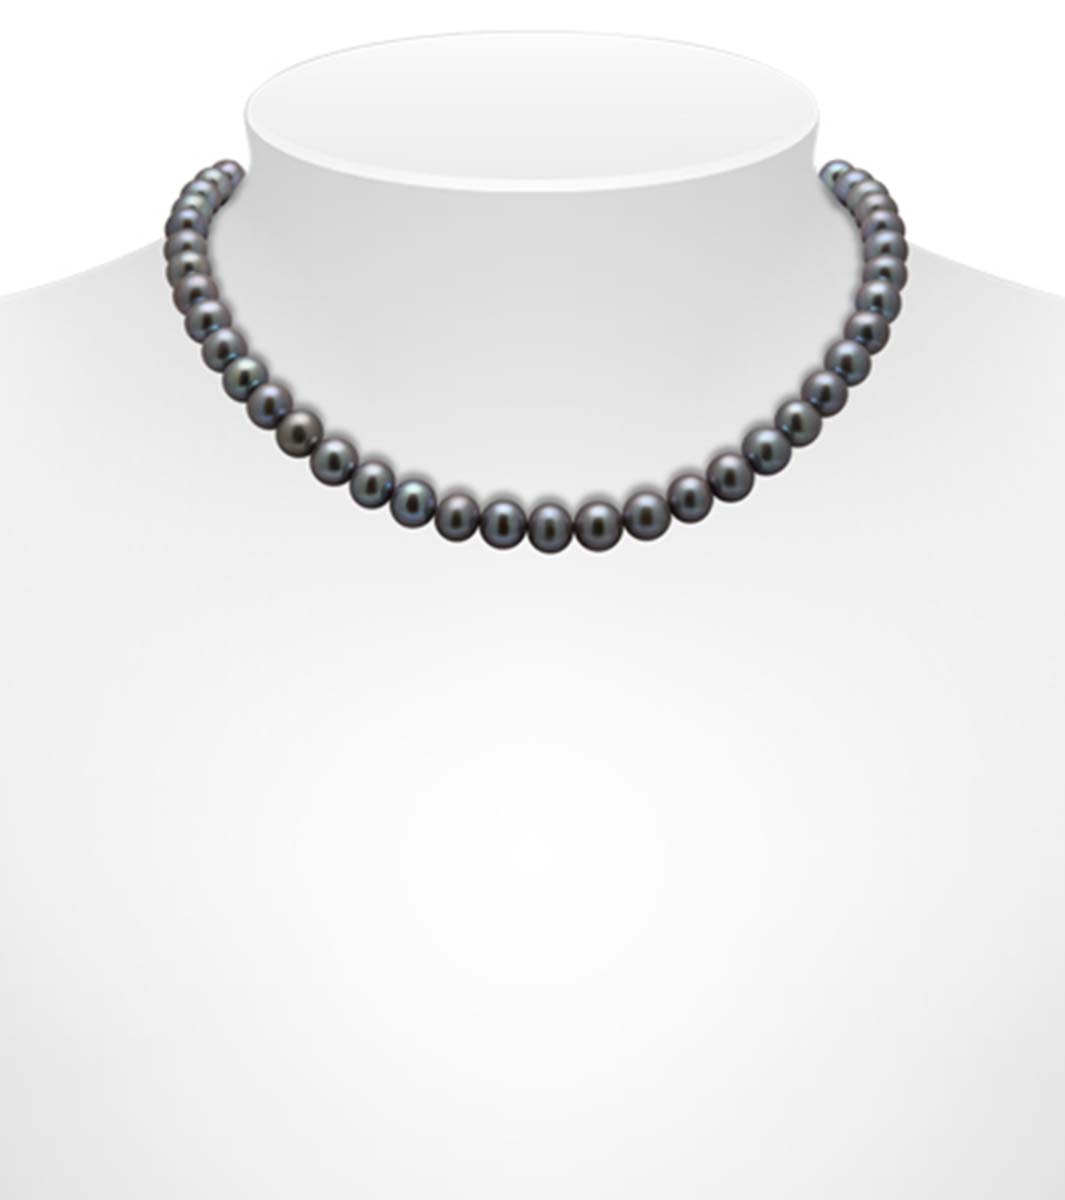 Black Freshwater Pearl Necklaces